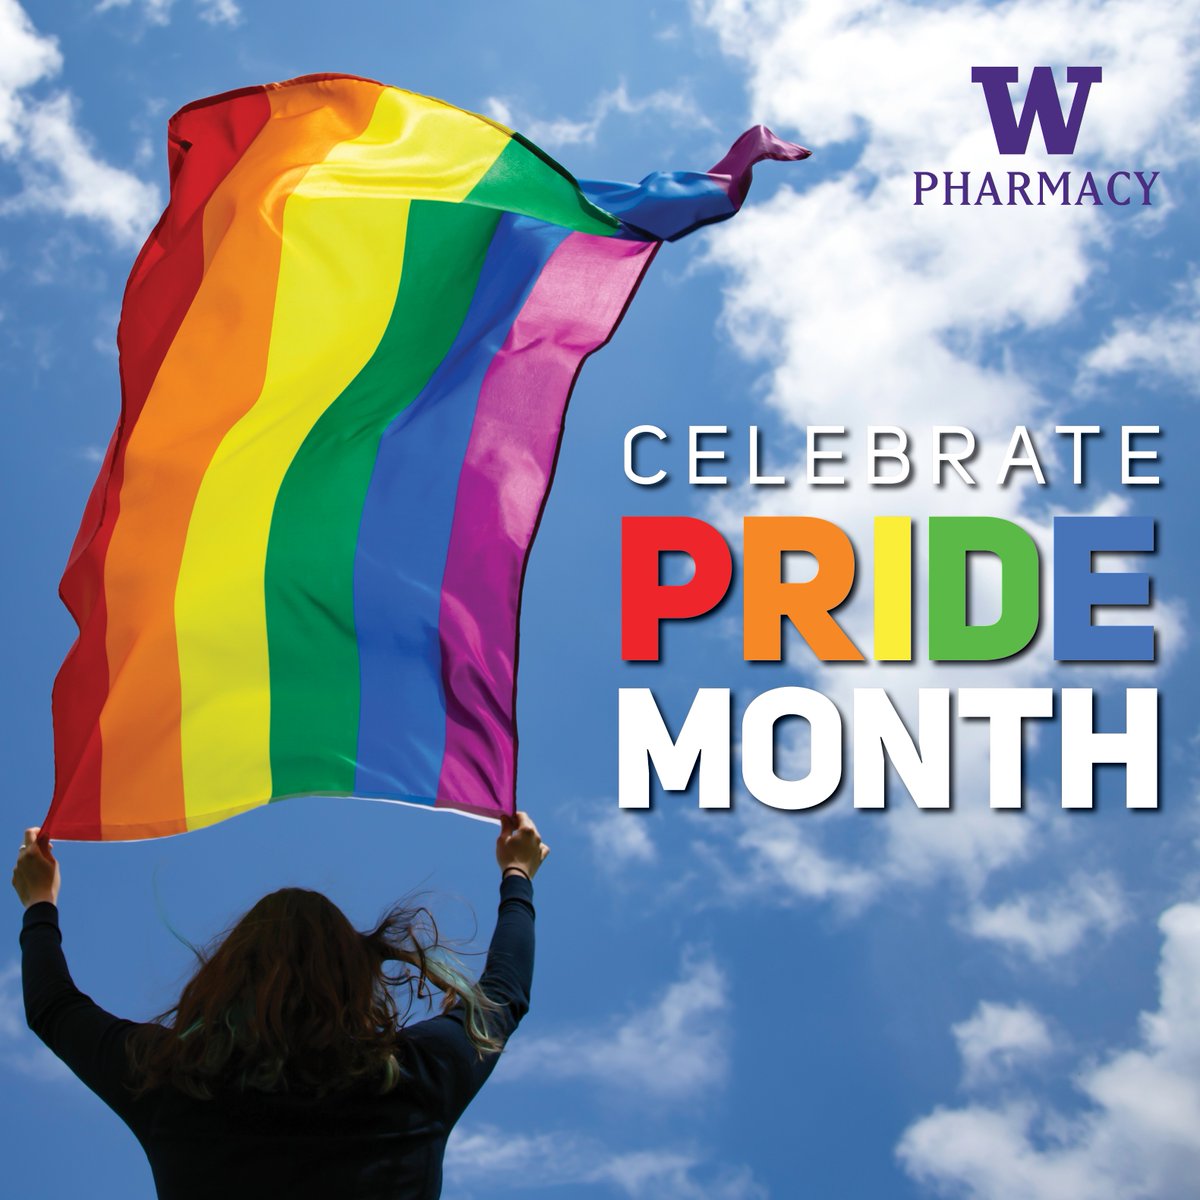 Happy Pride Month! We are proud to celebrate the importance of LGBTQ+ inclusion and a shared commitment to excellence in pharmacy practice and research, especially for the trans community. We honor their courage and stand with them in their journey towards equality. #ThisIsUW